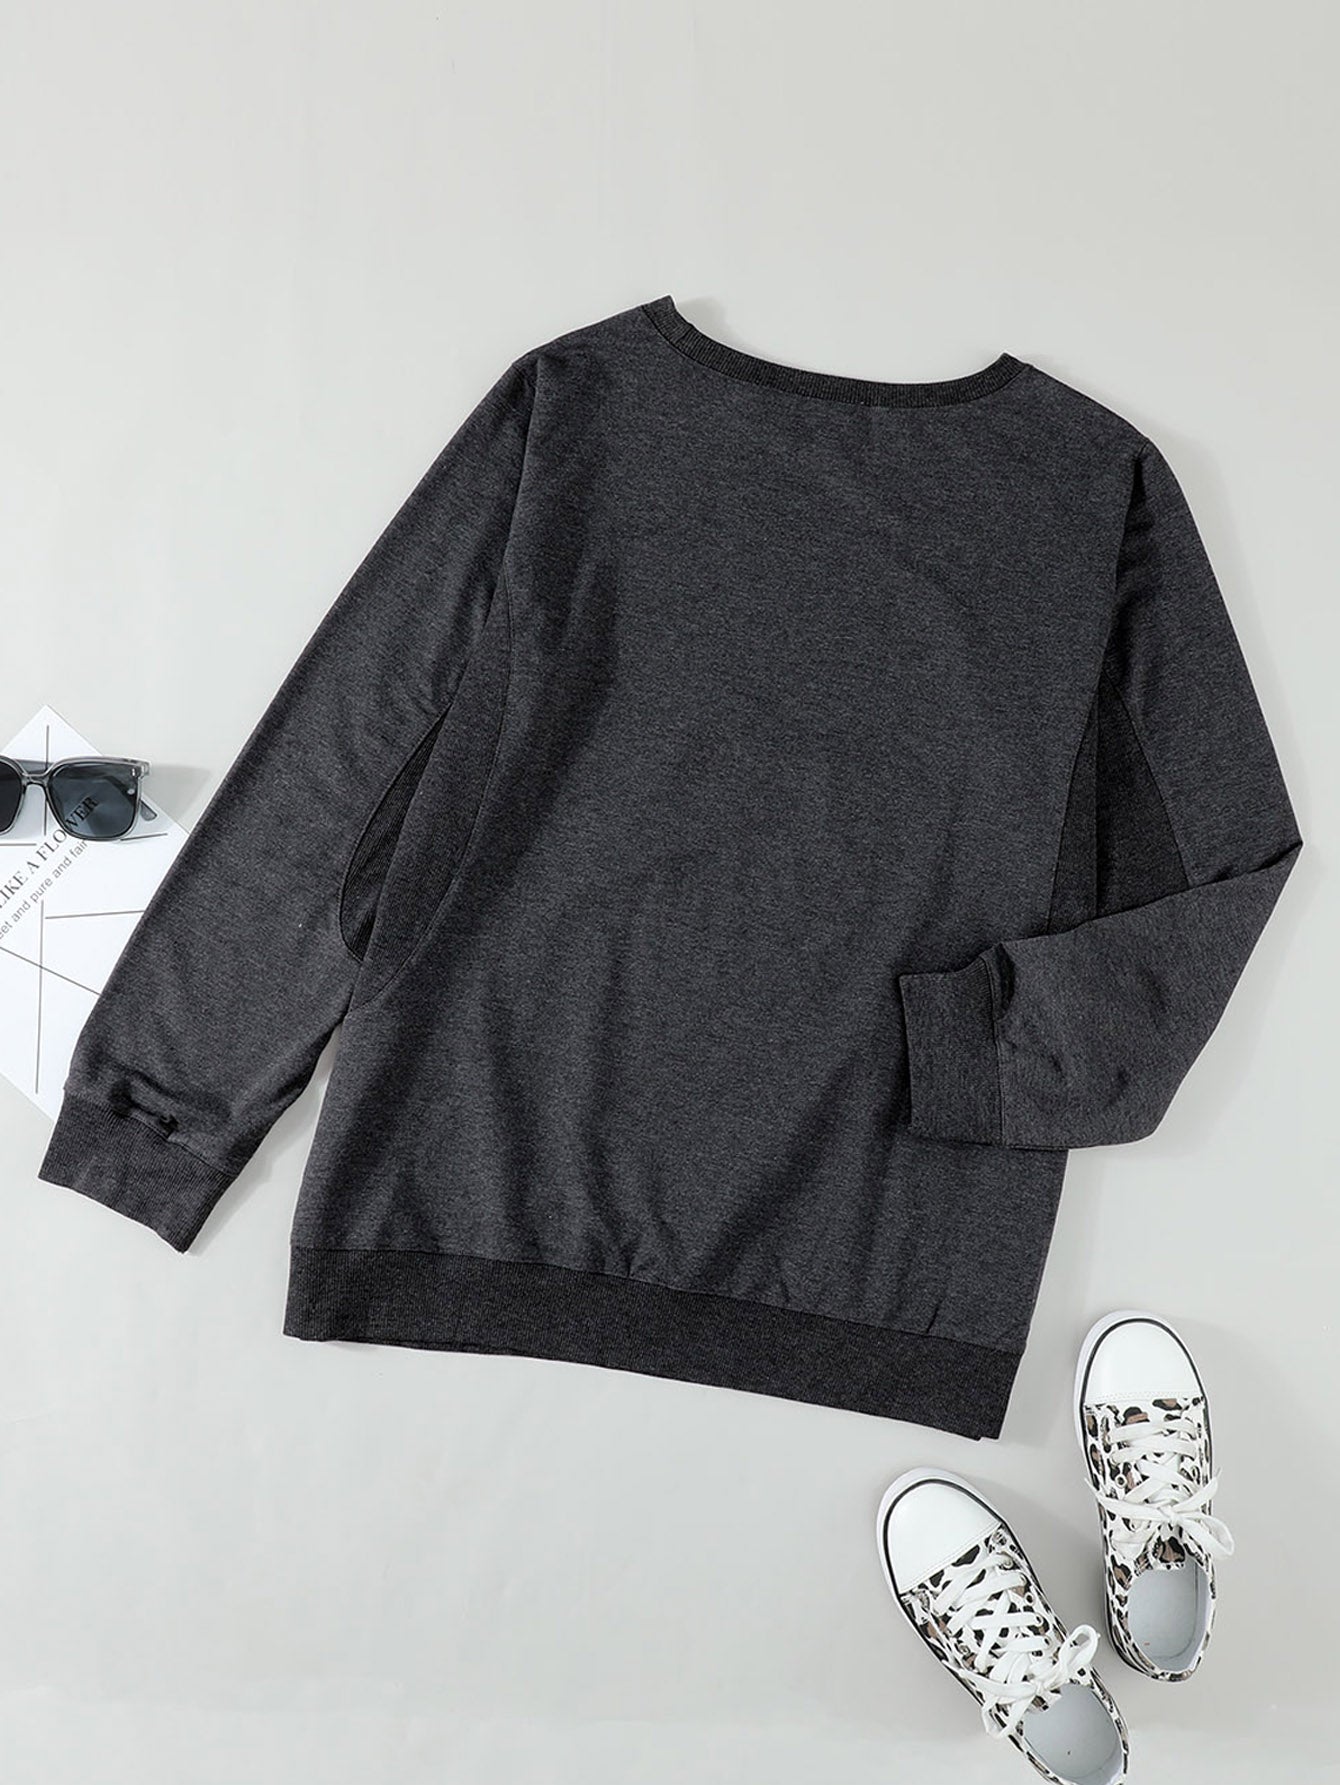 Women's Fashion Solid Color Round Neck Pullover Casual Long Sleeve Loose Sweatshirt Top Sai Feel